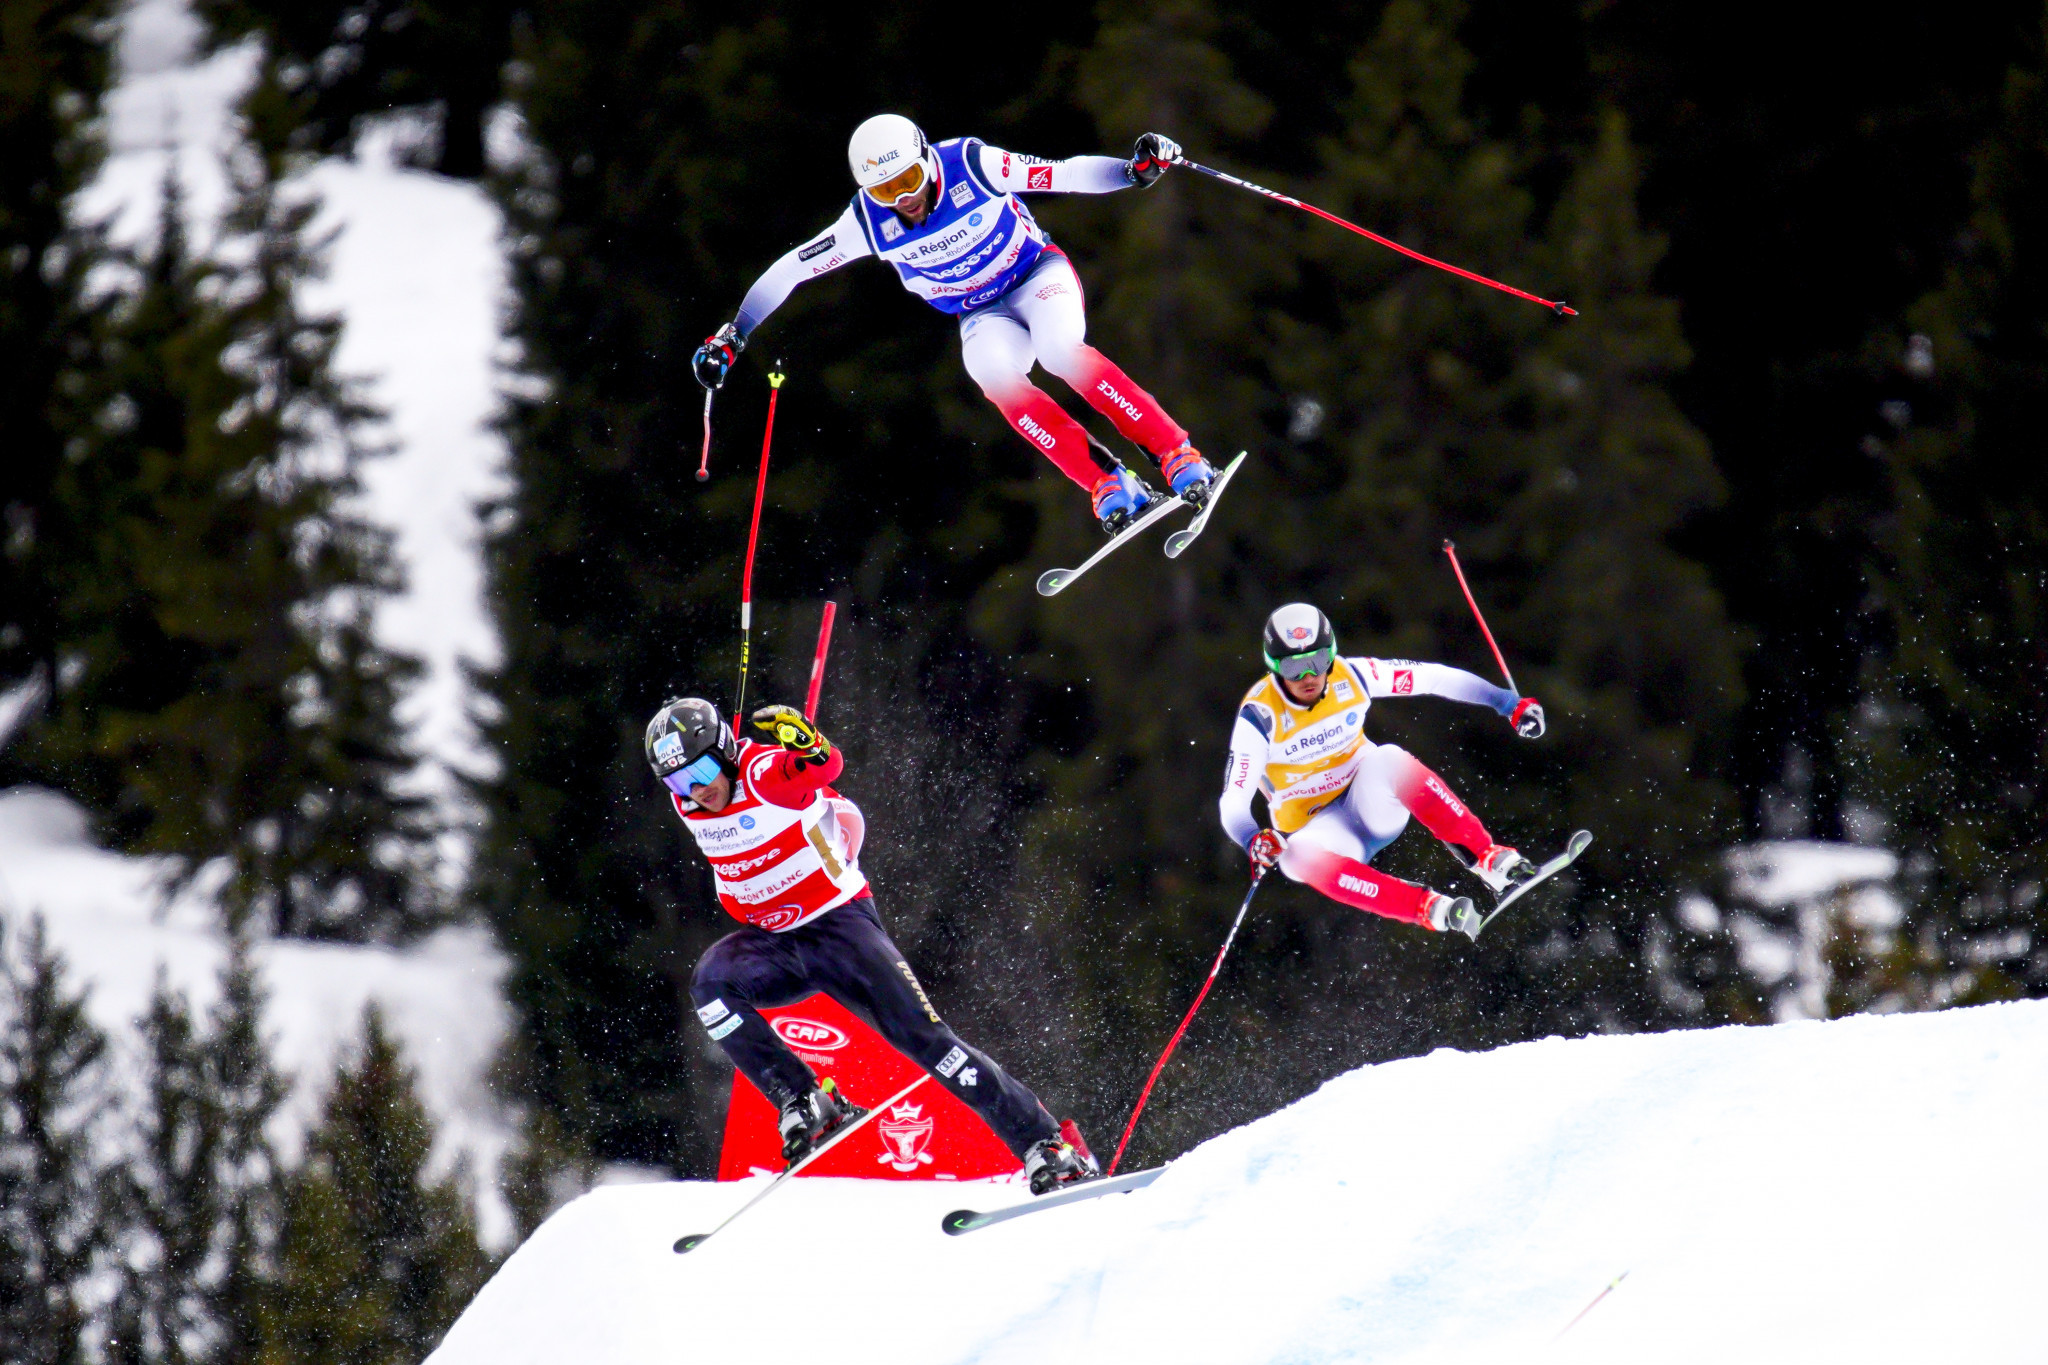 Drury extends overall lead with victory at FIS Ski Cross World Cup